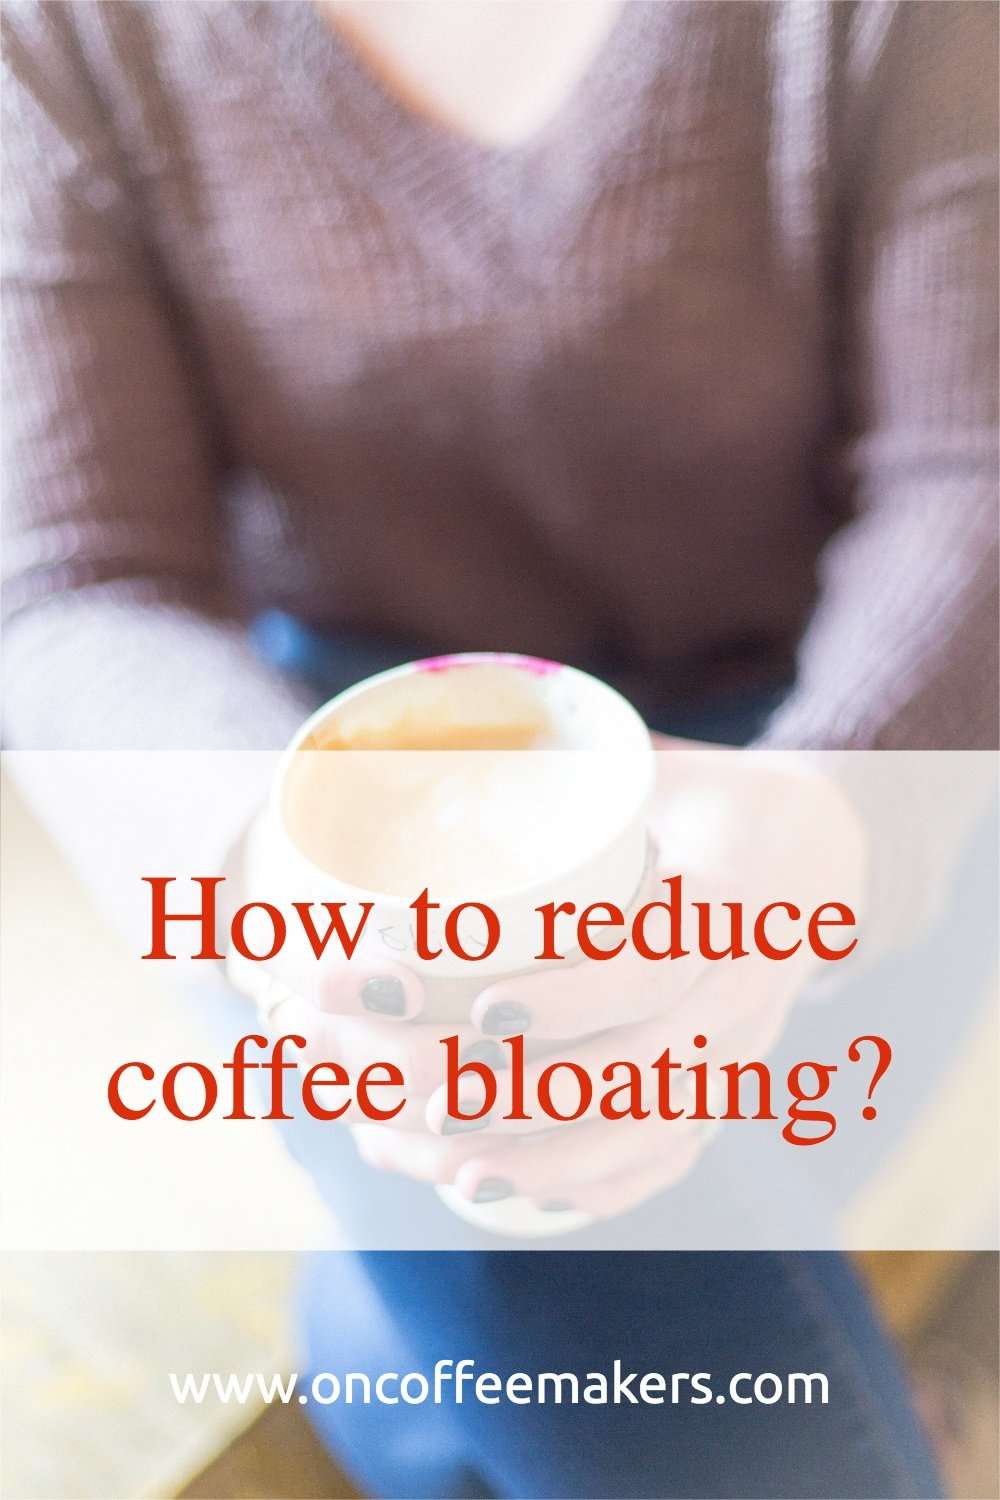 How to reduce coffee bloating?